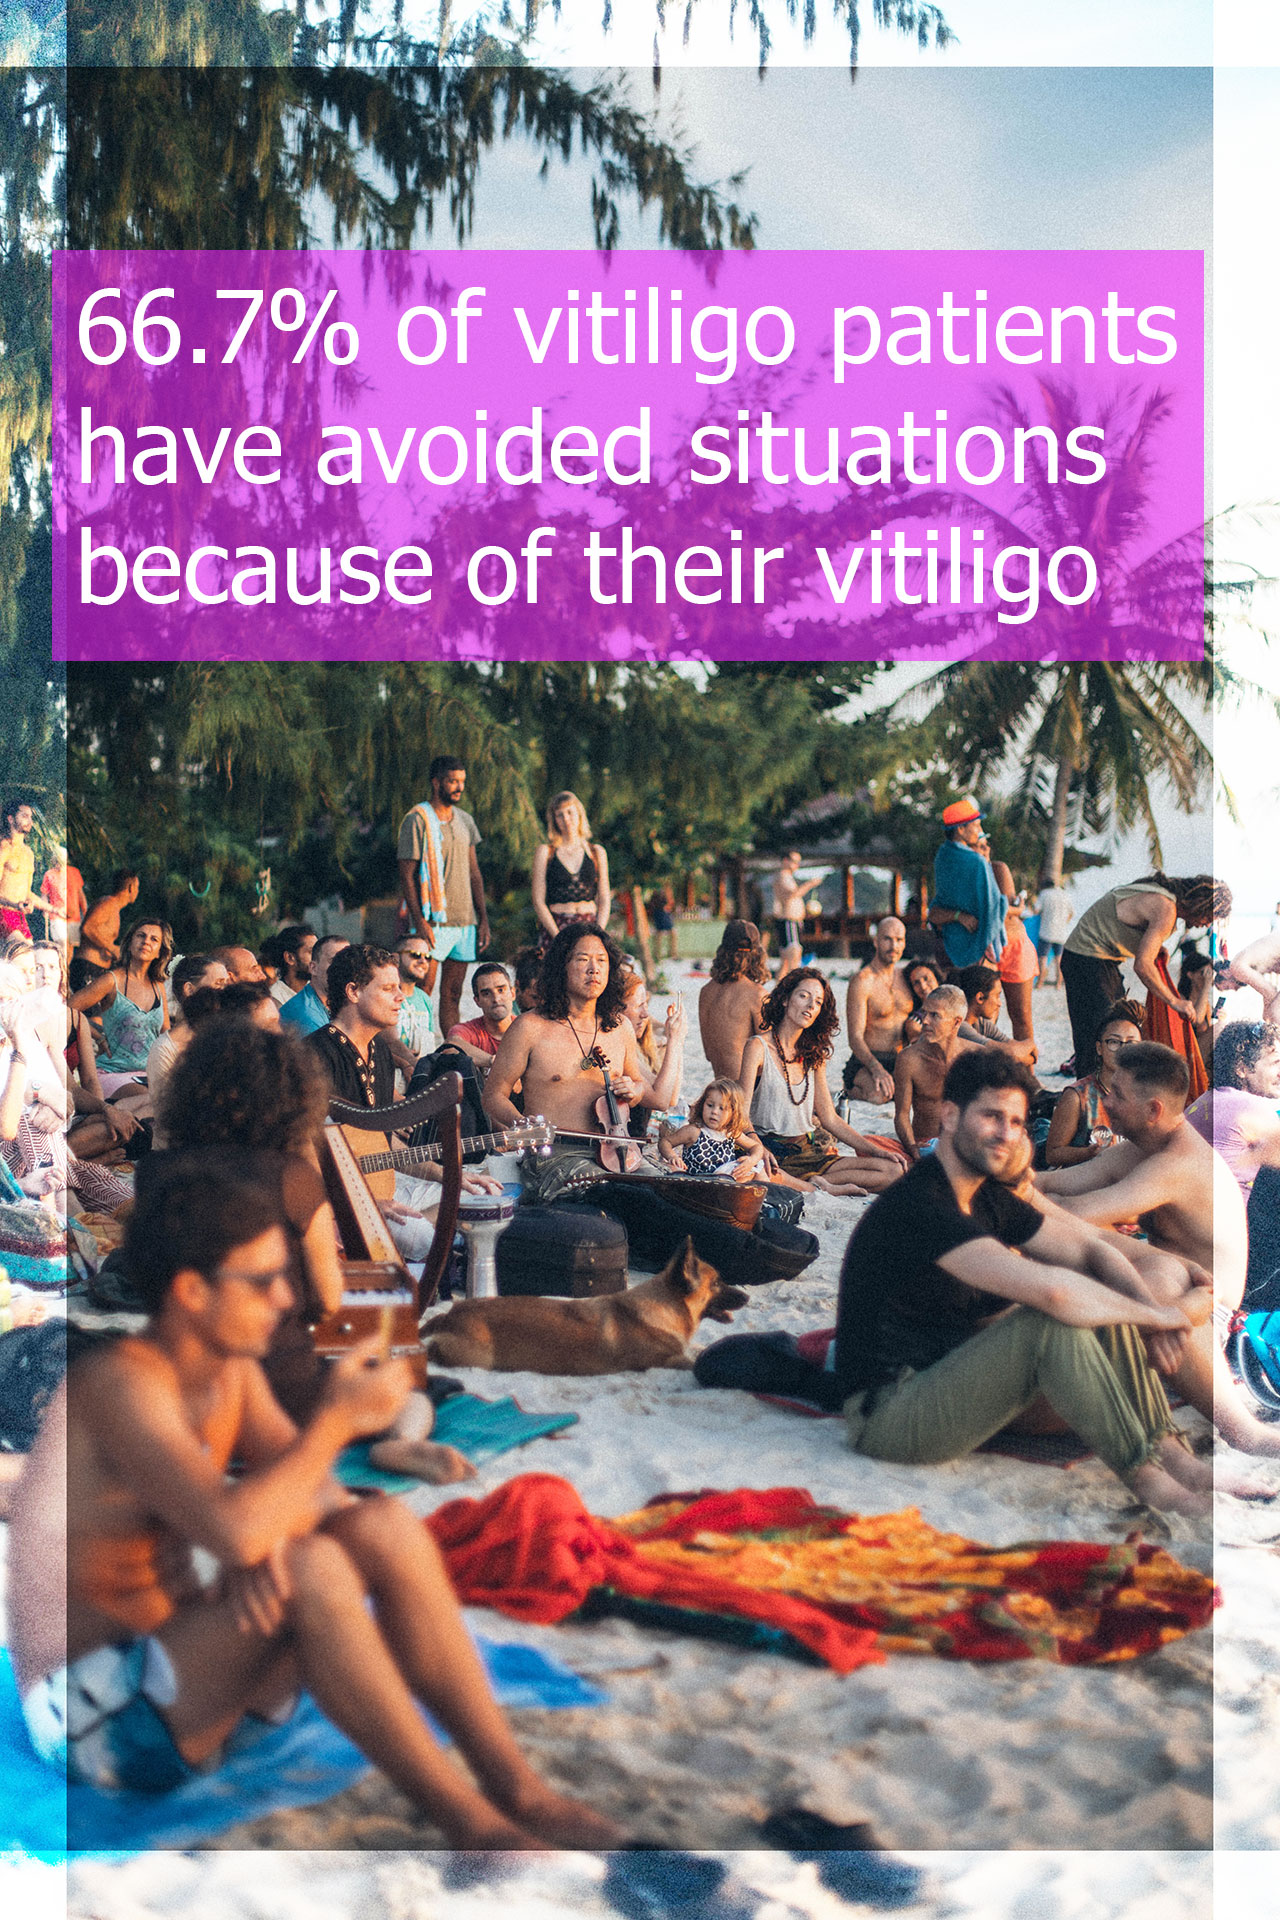 many vitiligo patients avoid situations because of their spots